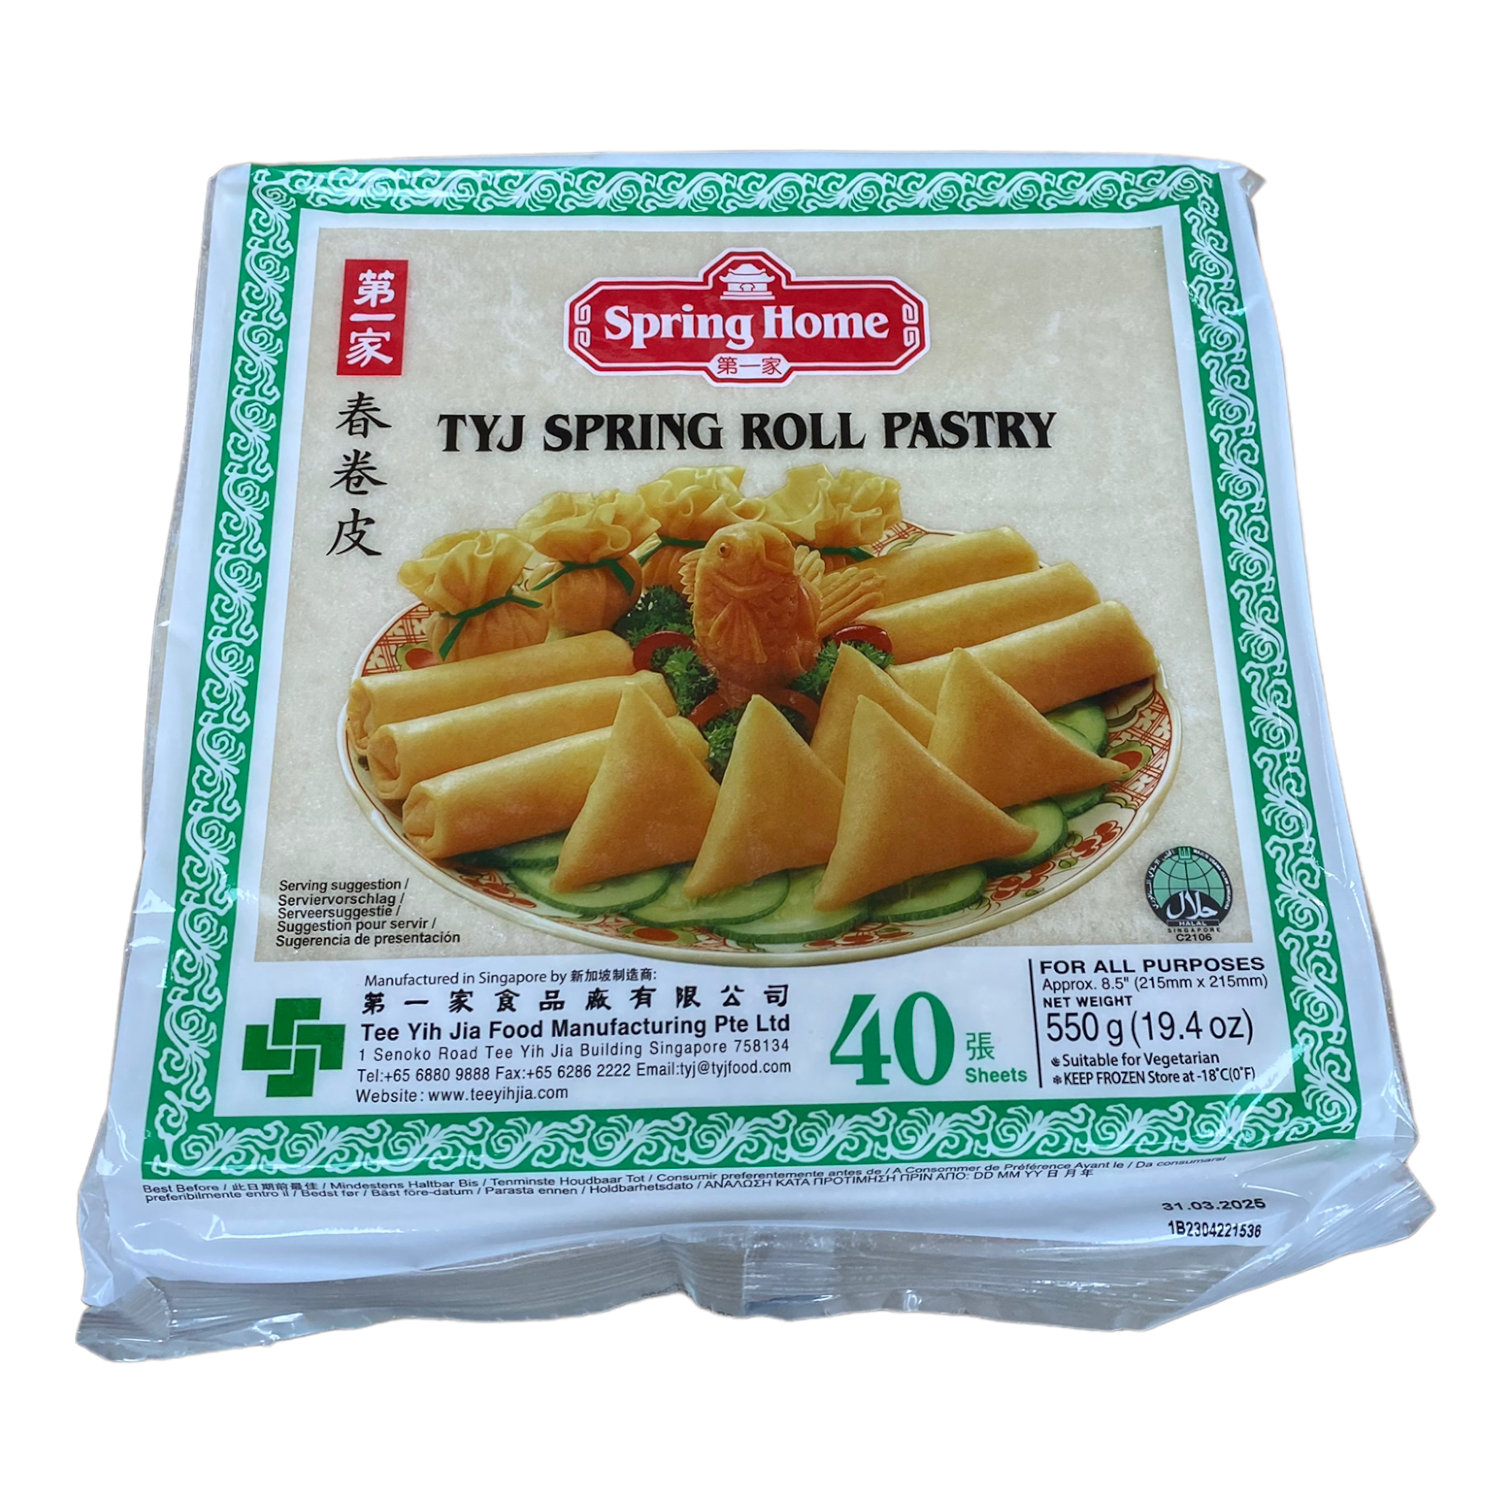 Spring Home - TYJ Spring Roll Pastry (550g)